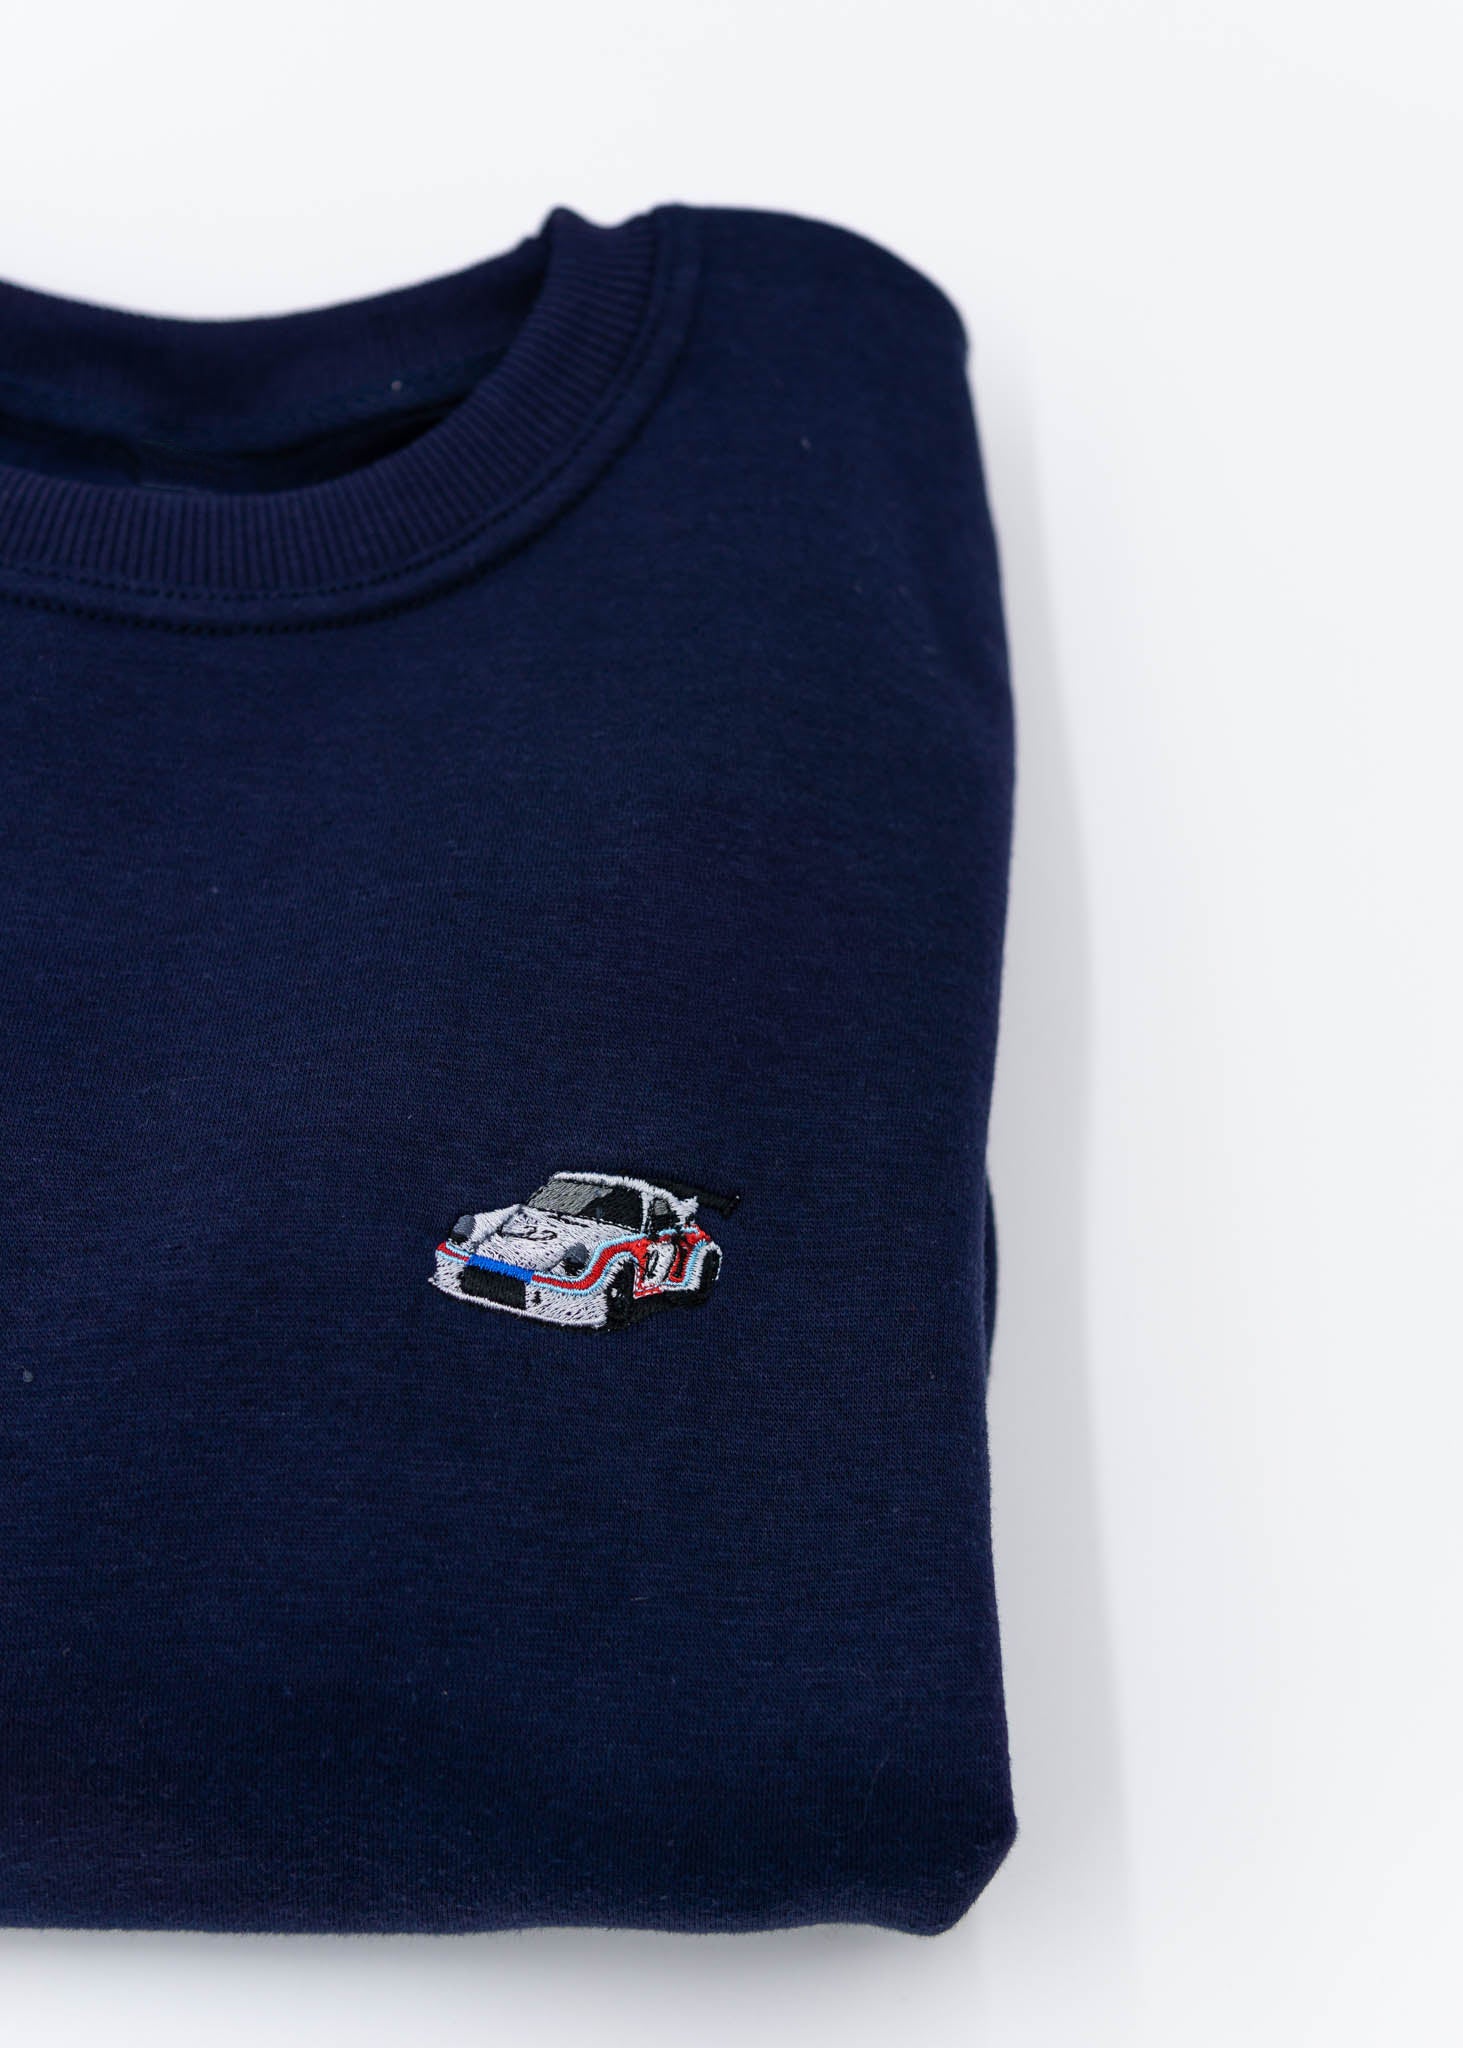 A navy blue Porsche race car crewneck sweater for men. Photo is a close up of the sweater with an embroidered Martini R13 Porsche 911 Carrera RSR 2.1 Turbo . Fabric is 100% cotton and high quality and fits to size. The style is long sleeve, crew neck, and embroidery on left chest.